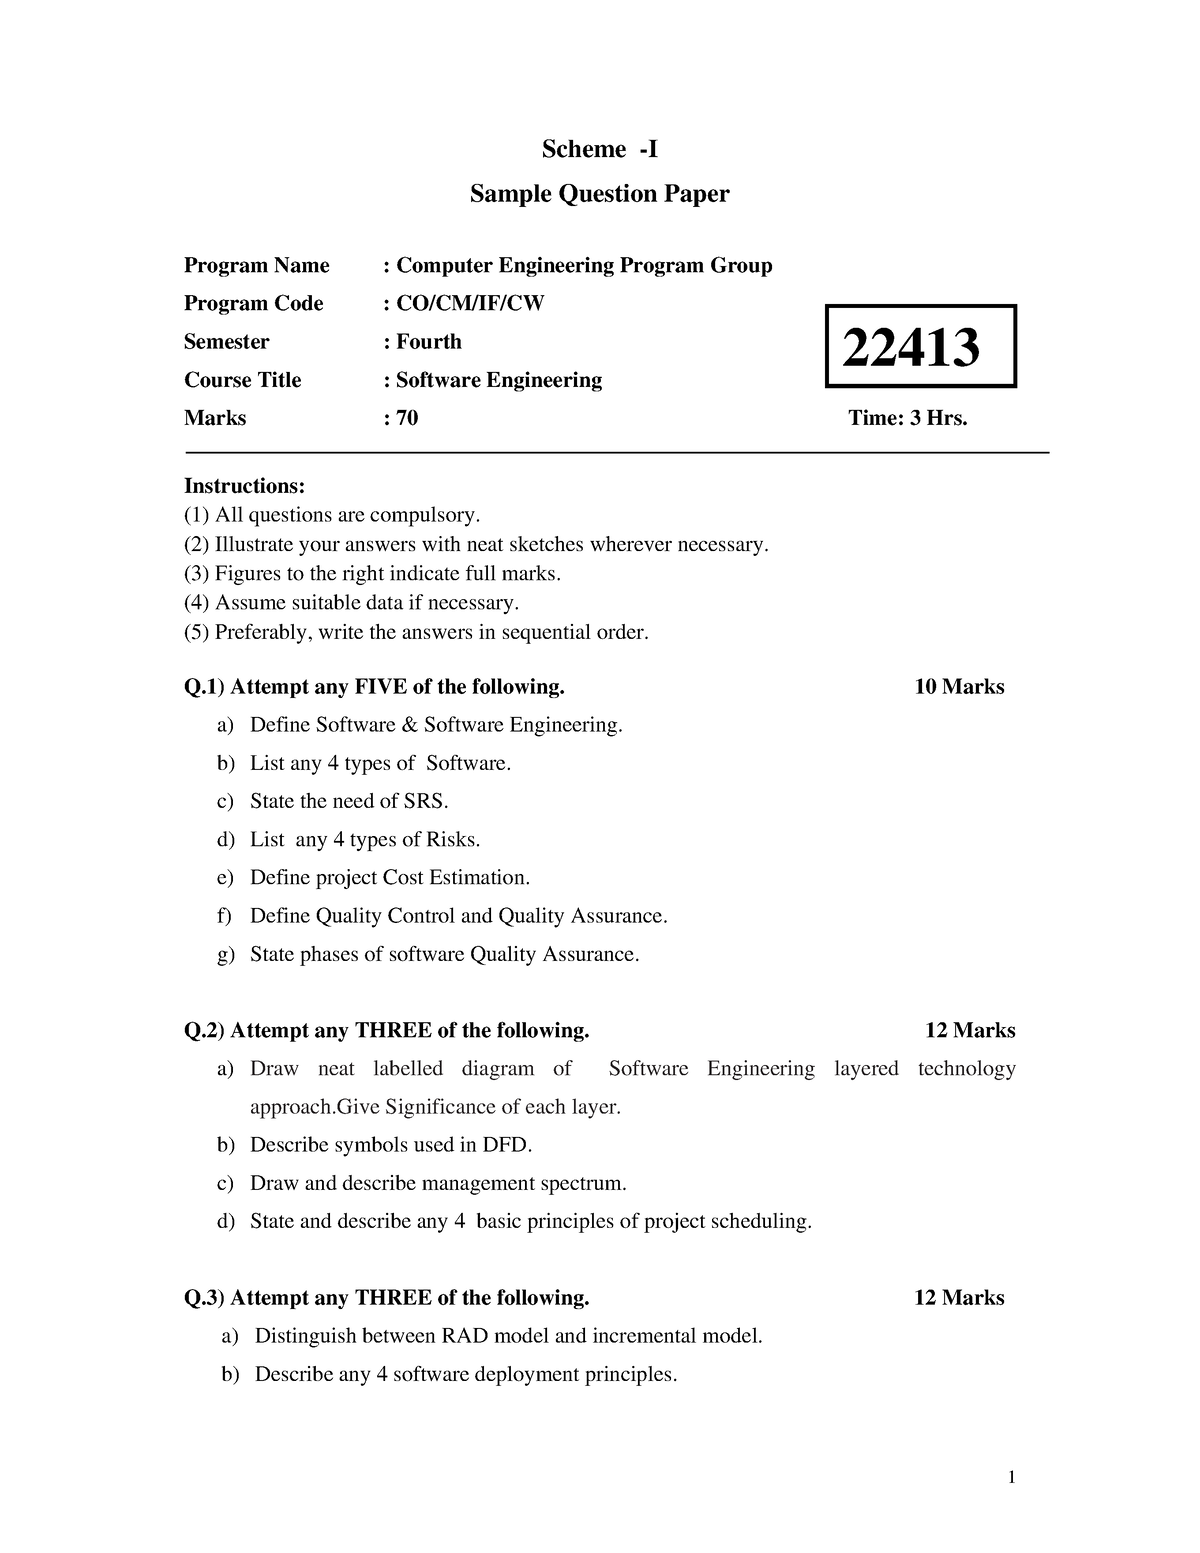 research paper topics on software engineering